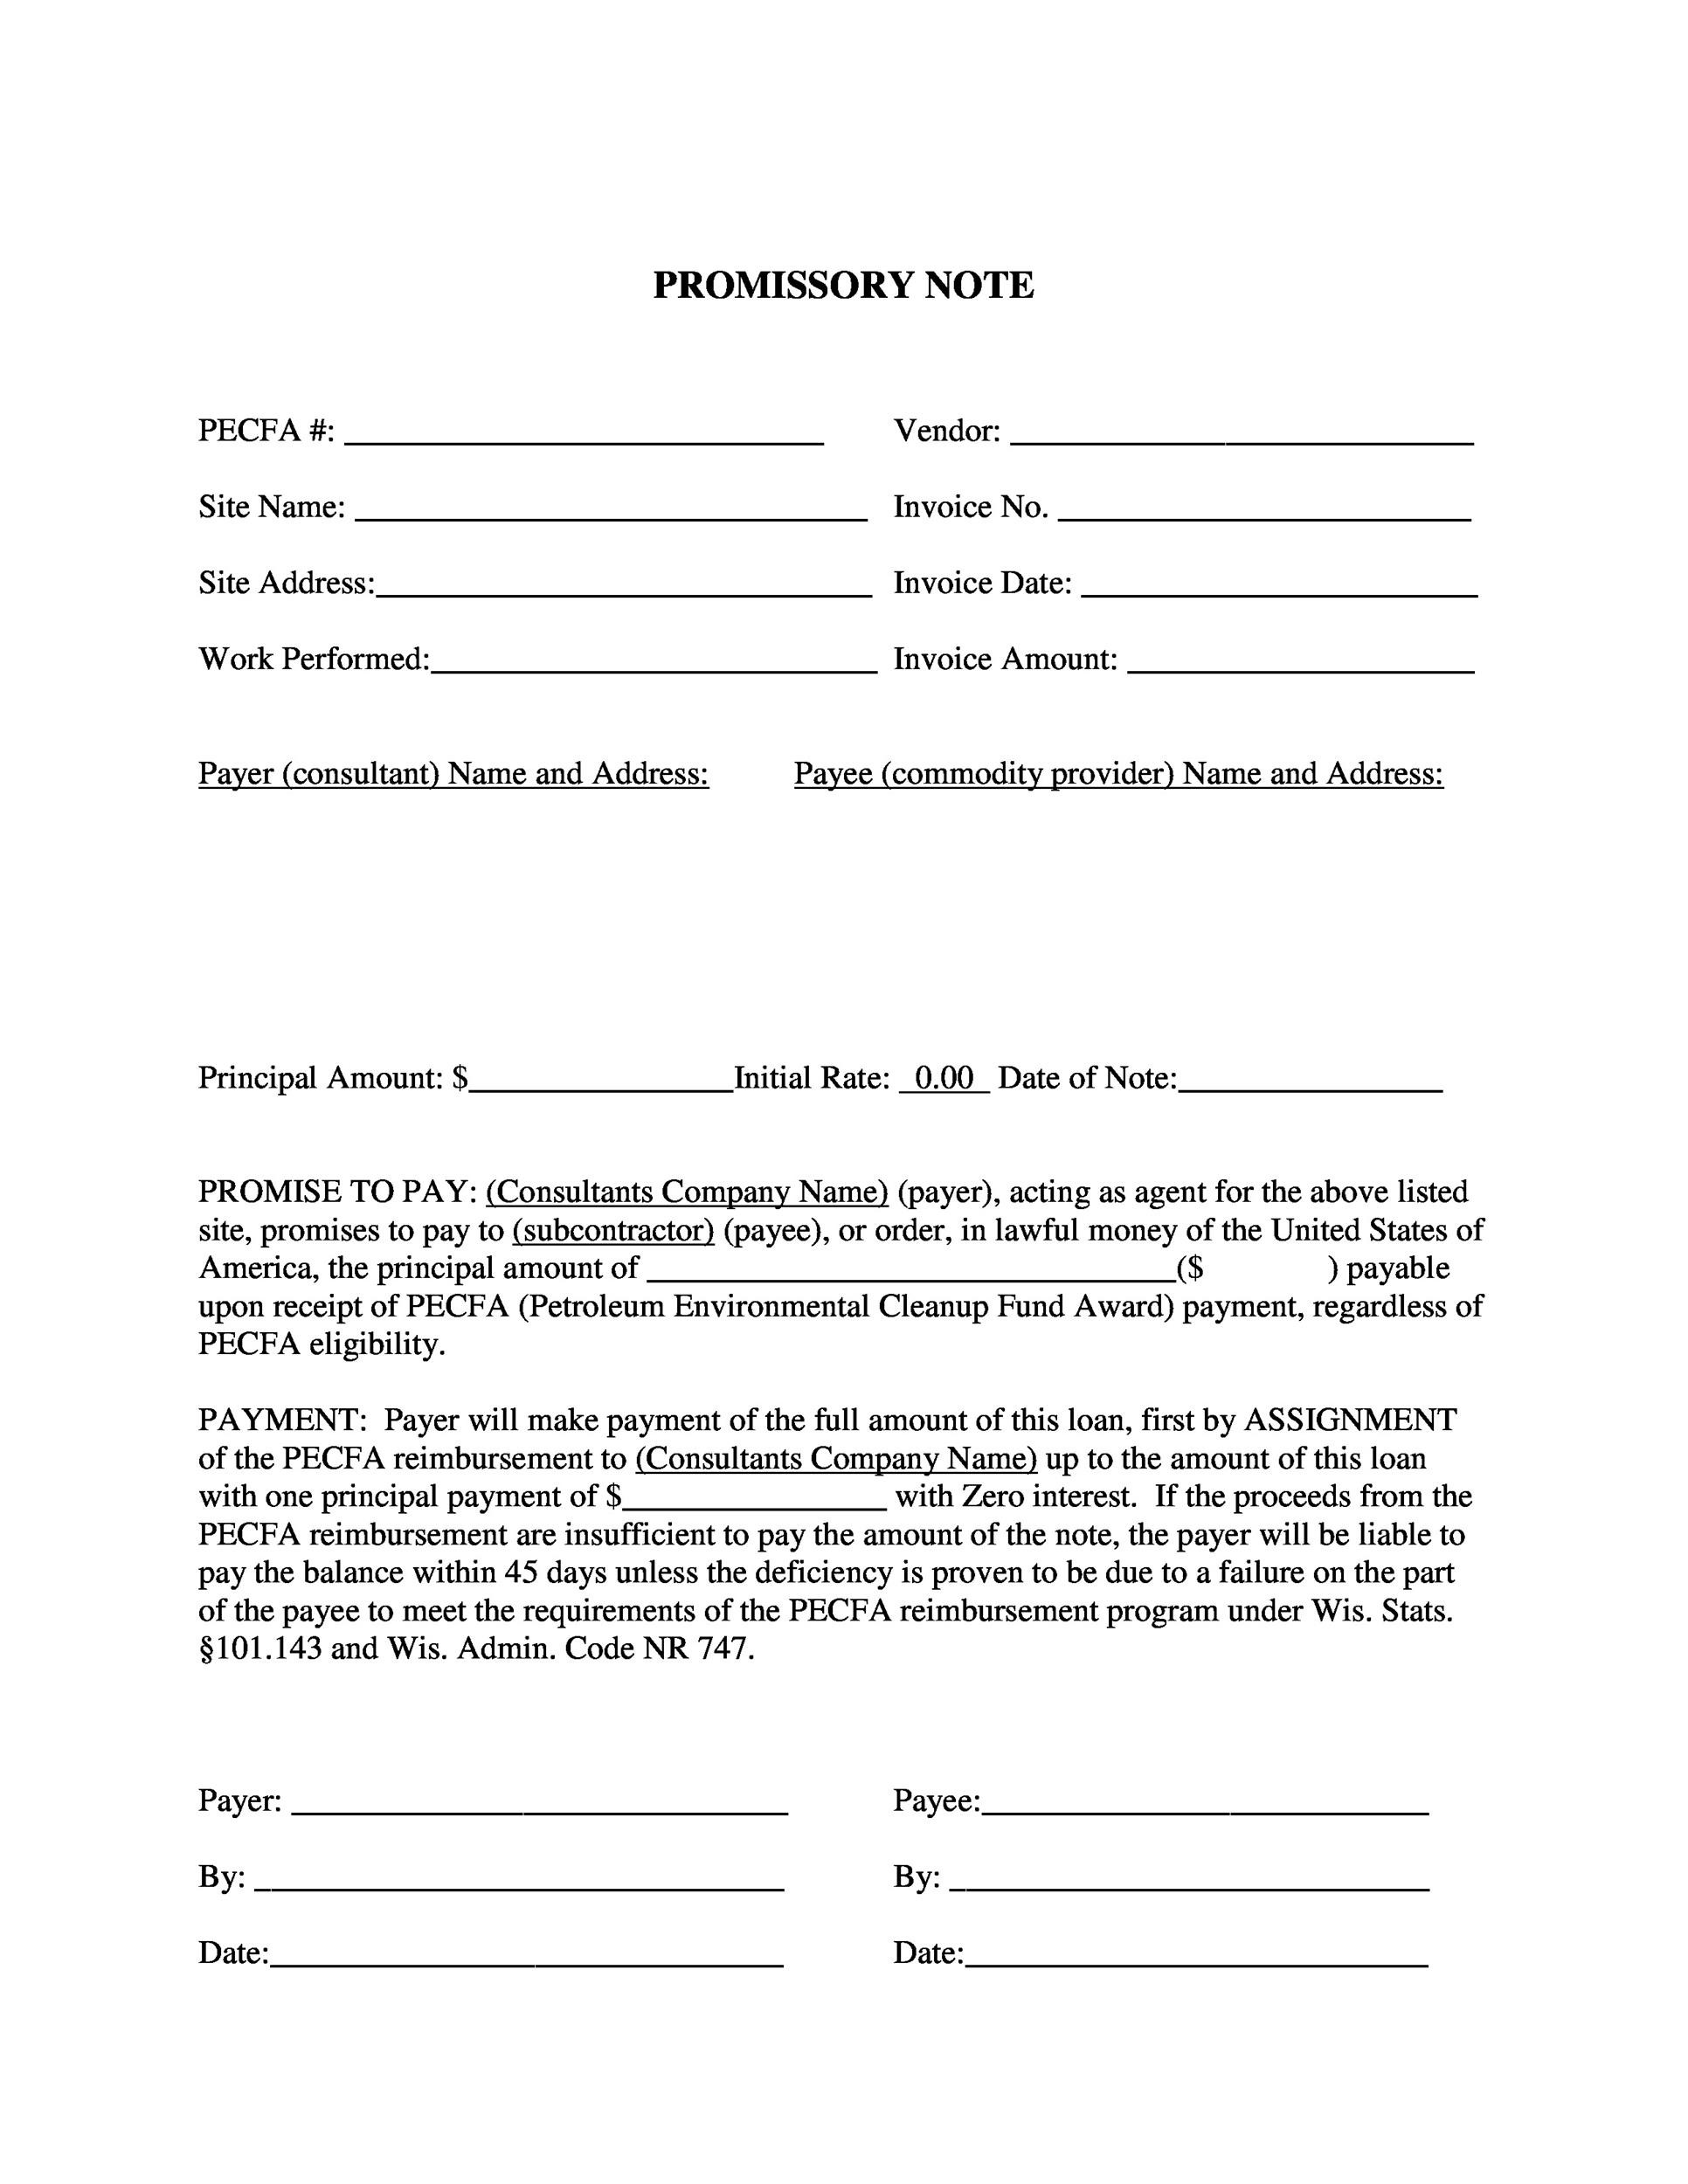 Free promissory note template 41